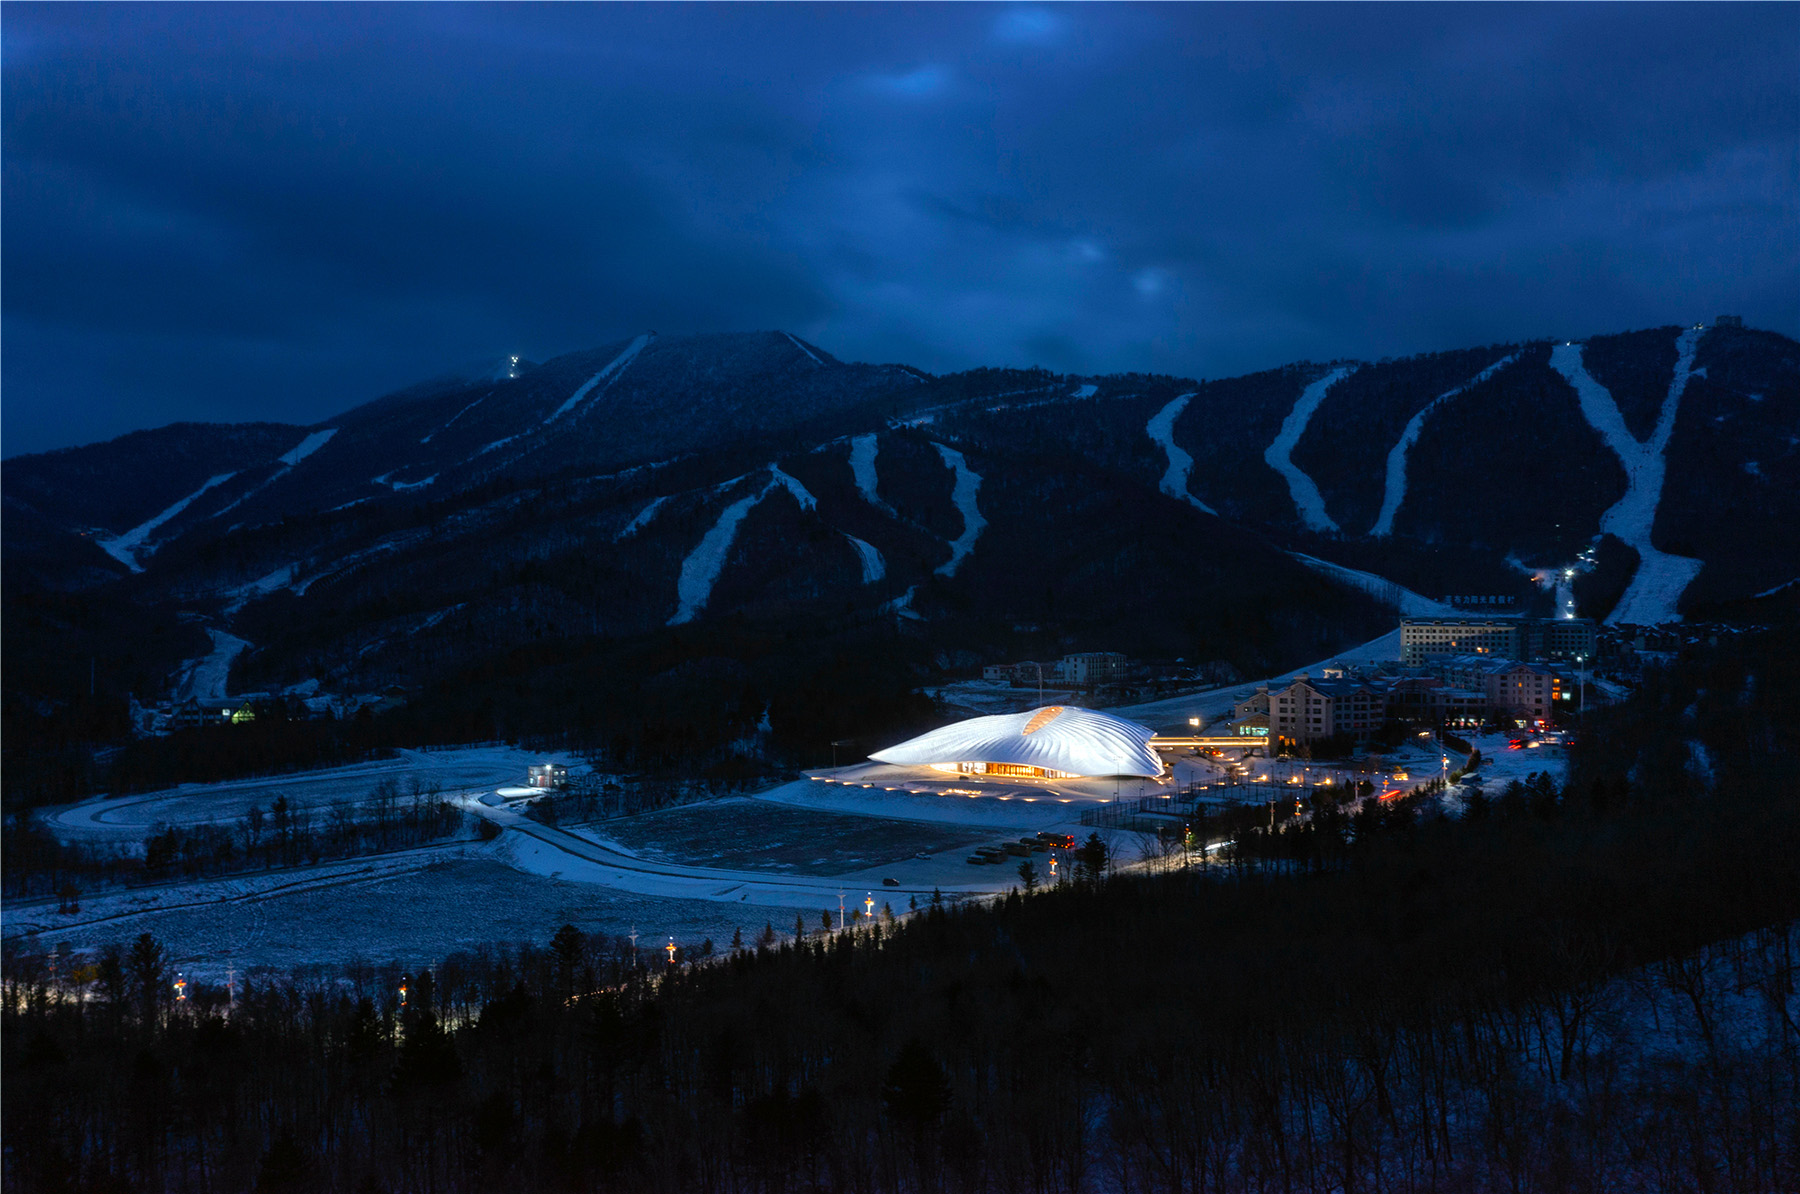 Nighttime image shows an irregular-shaped building lit up at night. The building is surrounded by mountains on one side and forest on the other. 